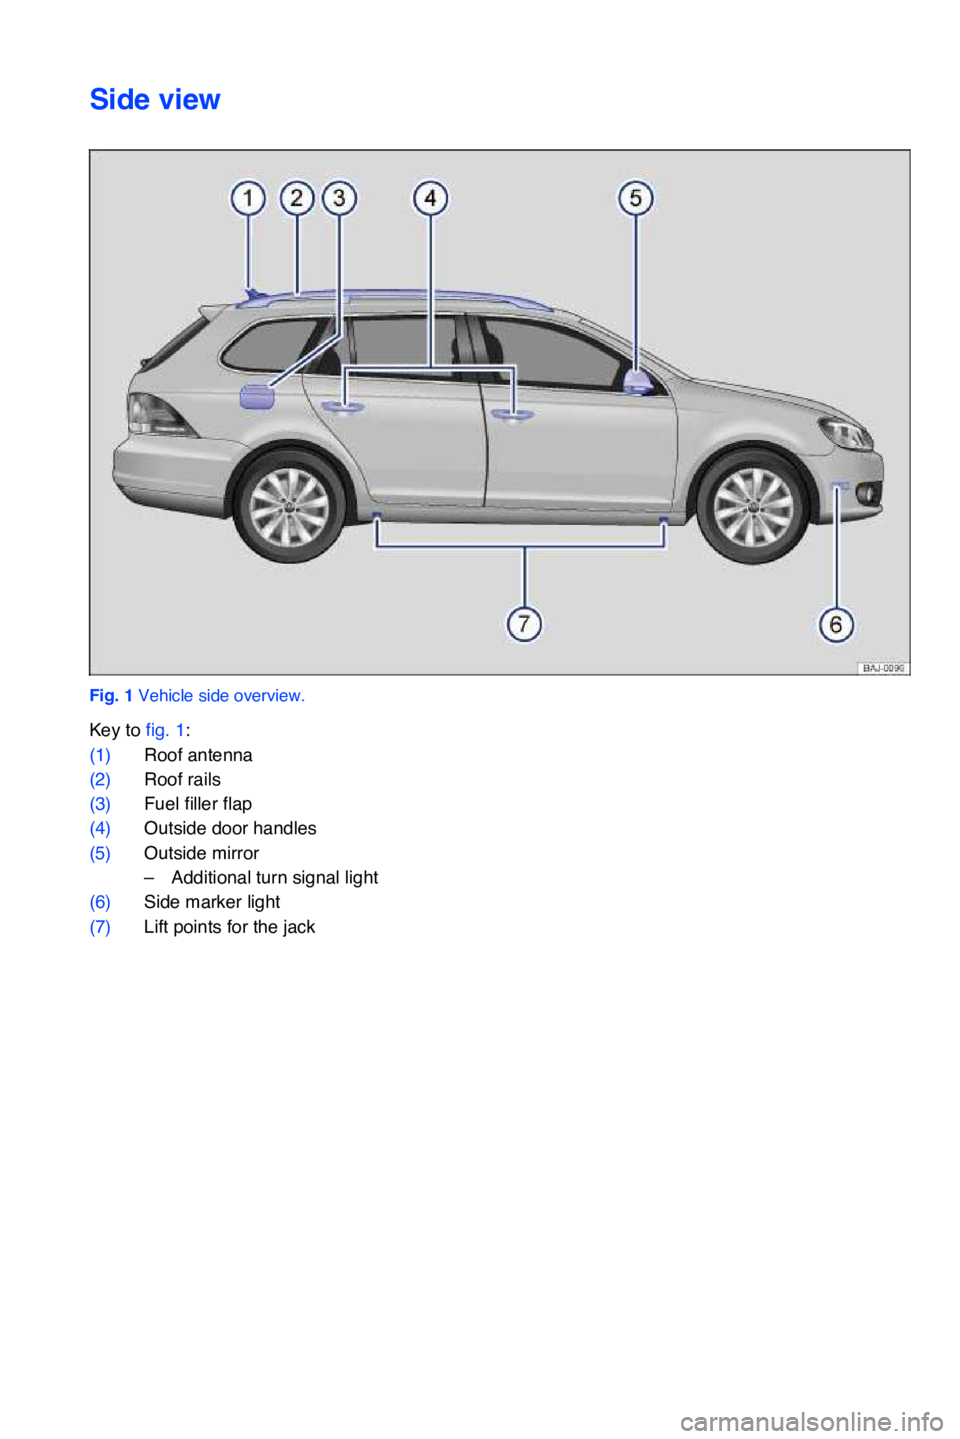 VOLKSWAGEN JETTA SPORTWAGEN 2013  Owners Manual Side view
Fig. 1 Vehicle side overview.
Key to fig. 1:
(1)Roof antenna 
(2)Roof rails 
(3)Fuel filler flap 
(4)Outside door handles
(5)Outside mirror 
–Additional turn signal light 
(6)Side marker l